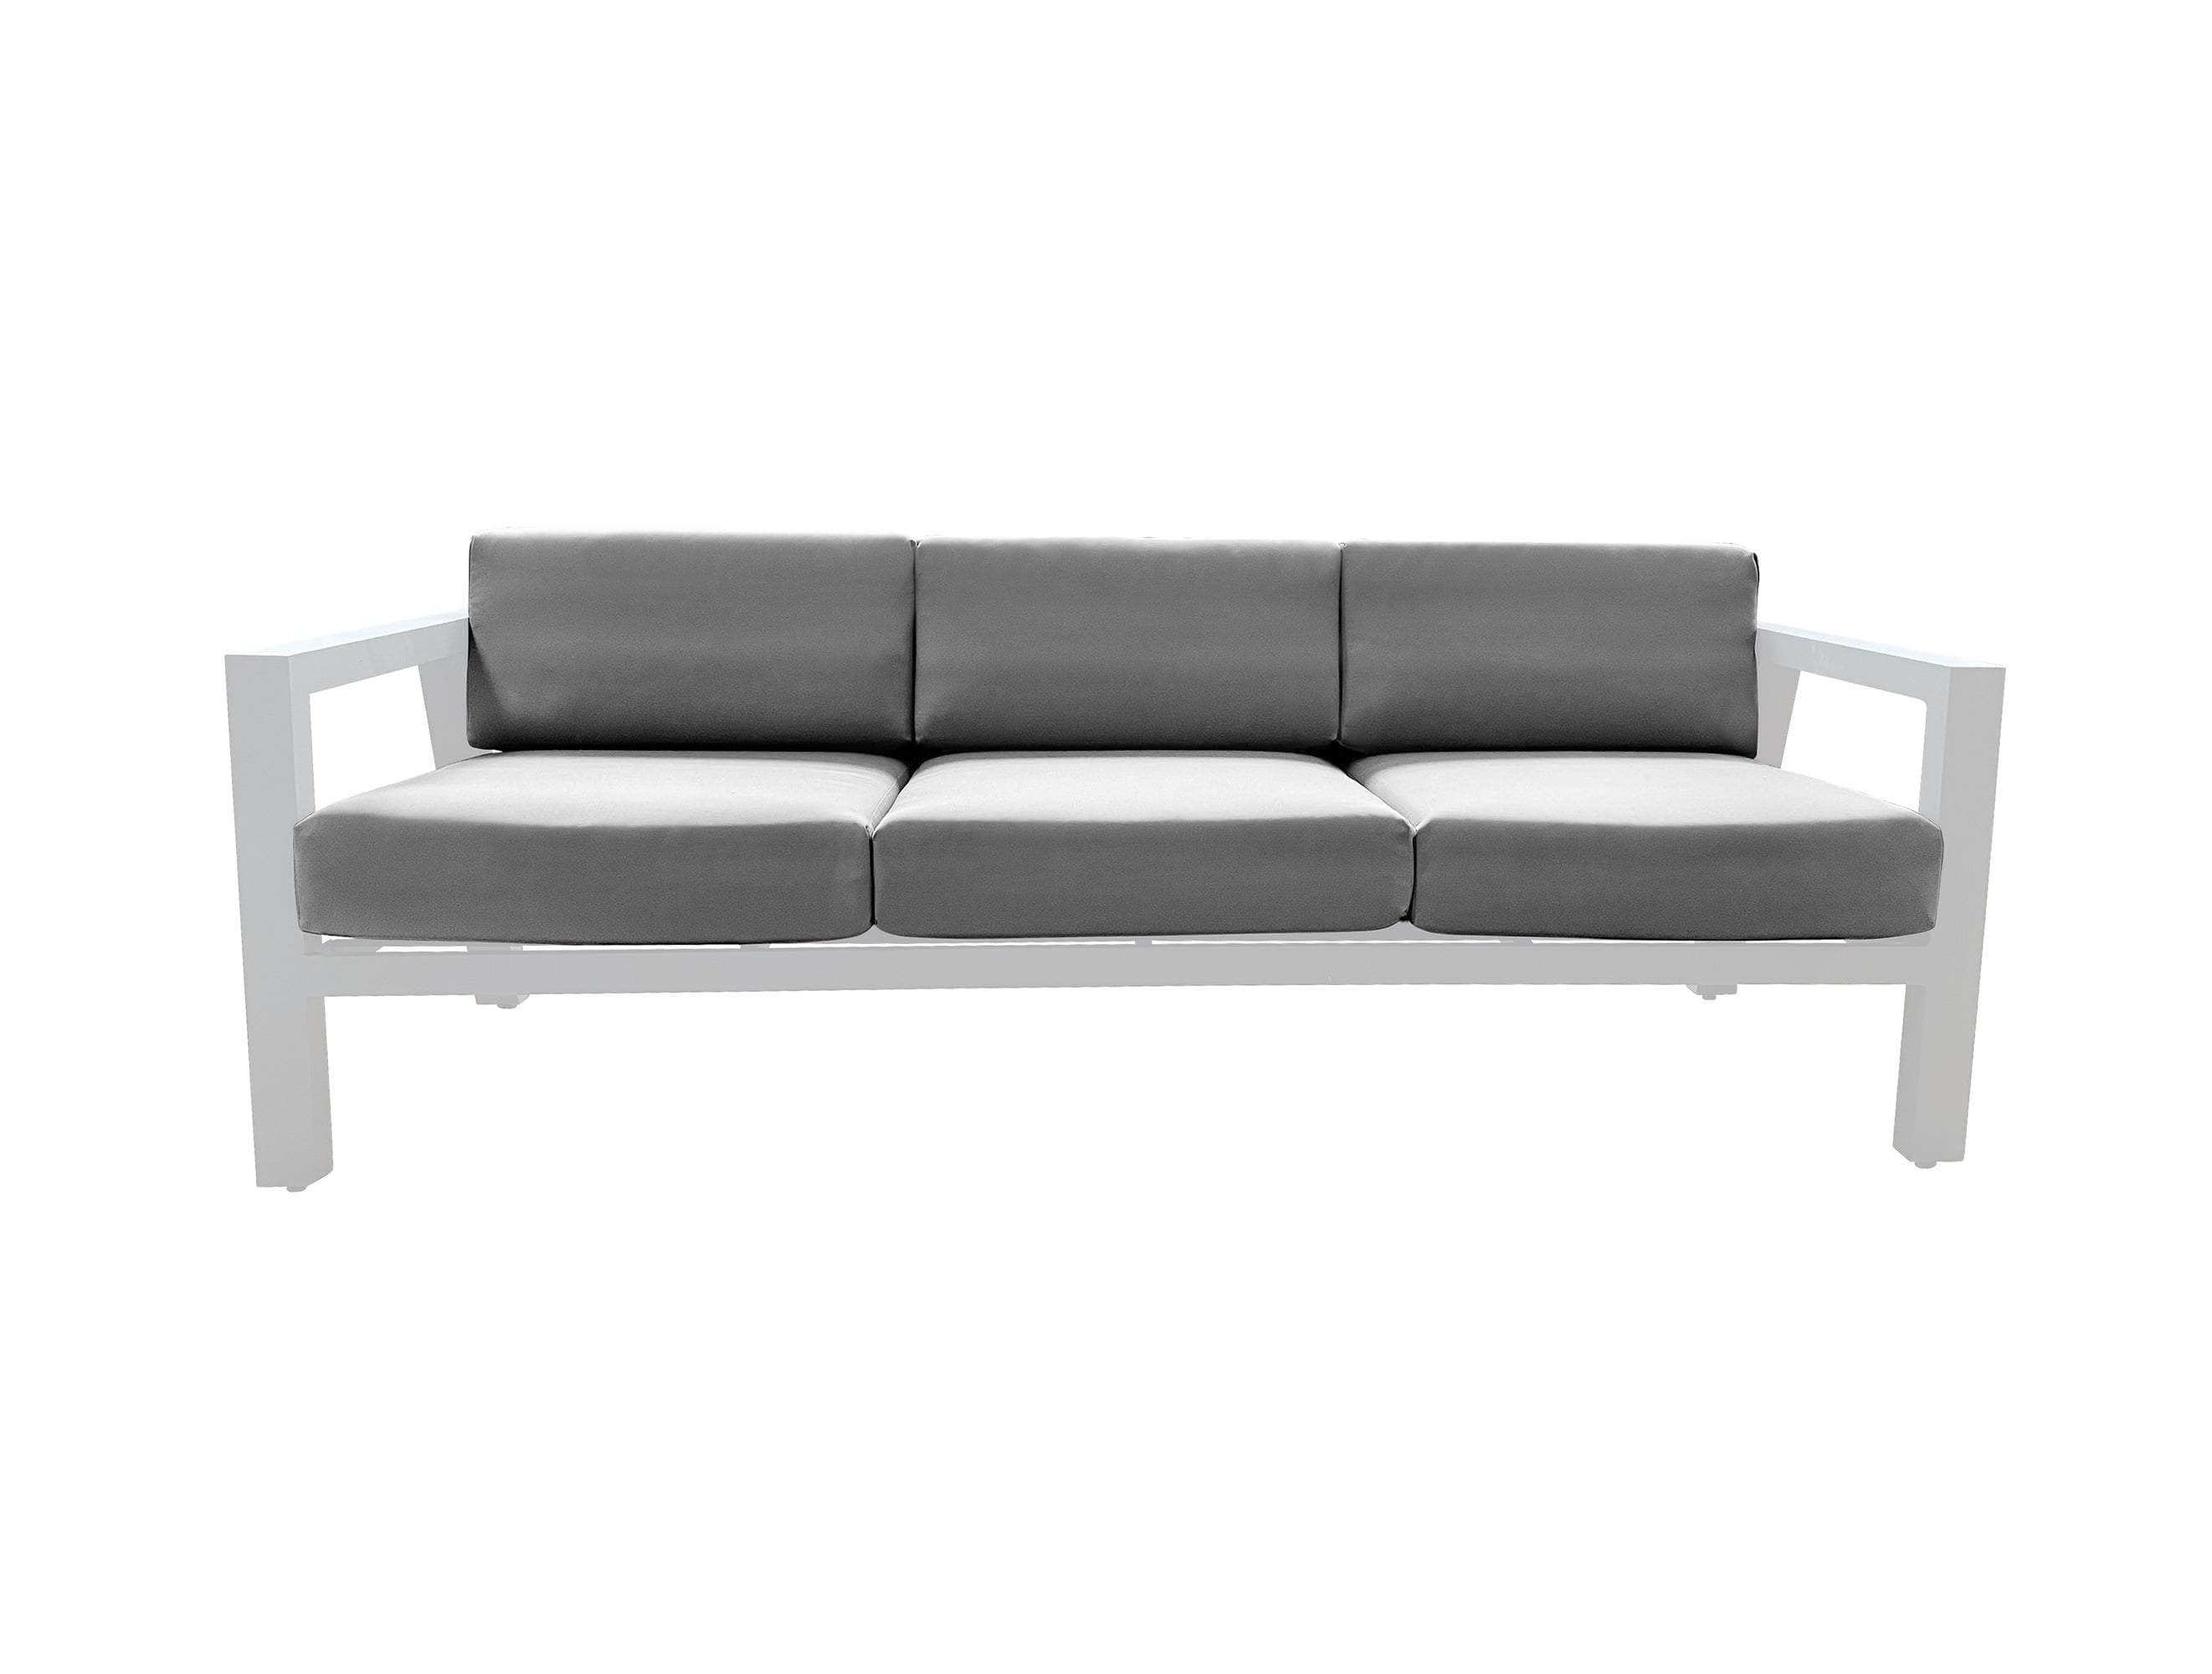 CIEUX Sofa Canvas Charcoal Corsica Outdoor Patio Aluminum Metal Sofa in White with Sunbrella Cushions - Available in 2 Colours